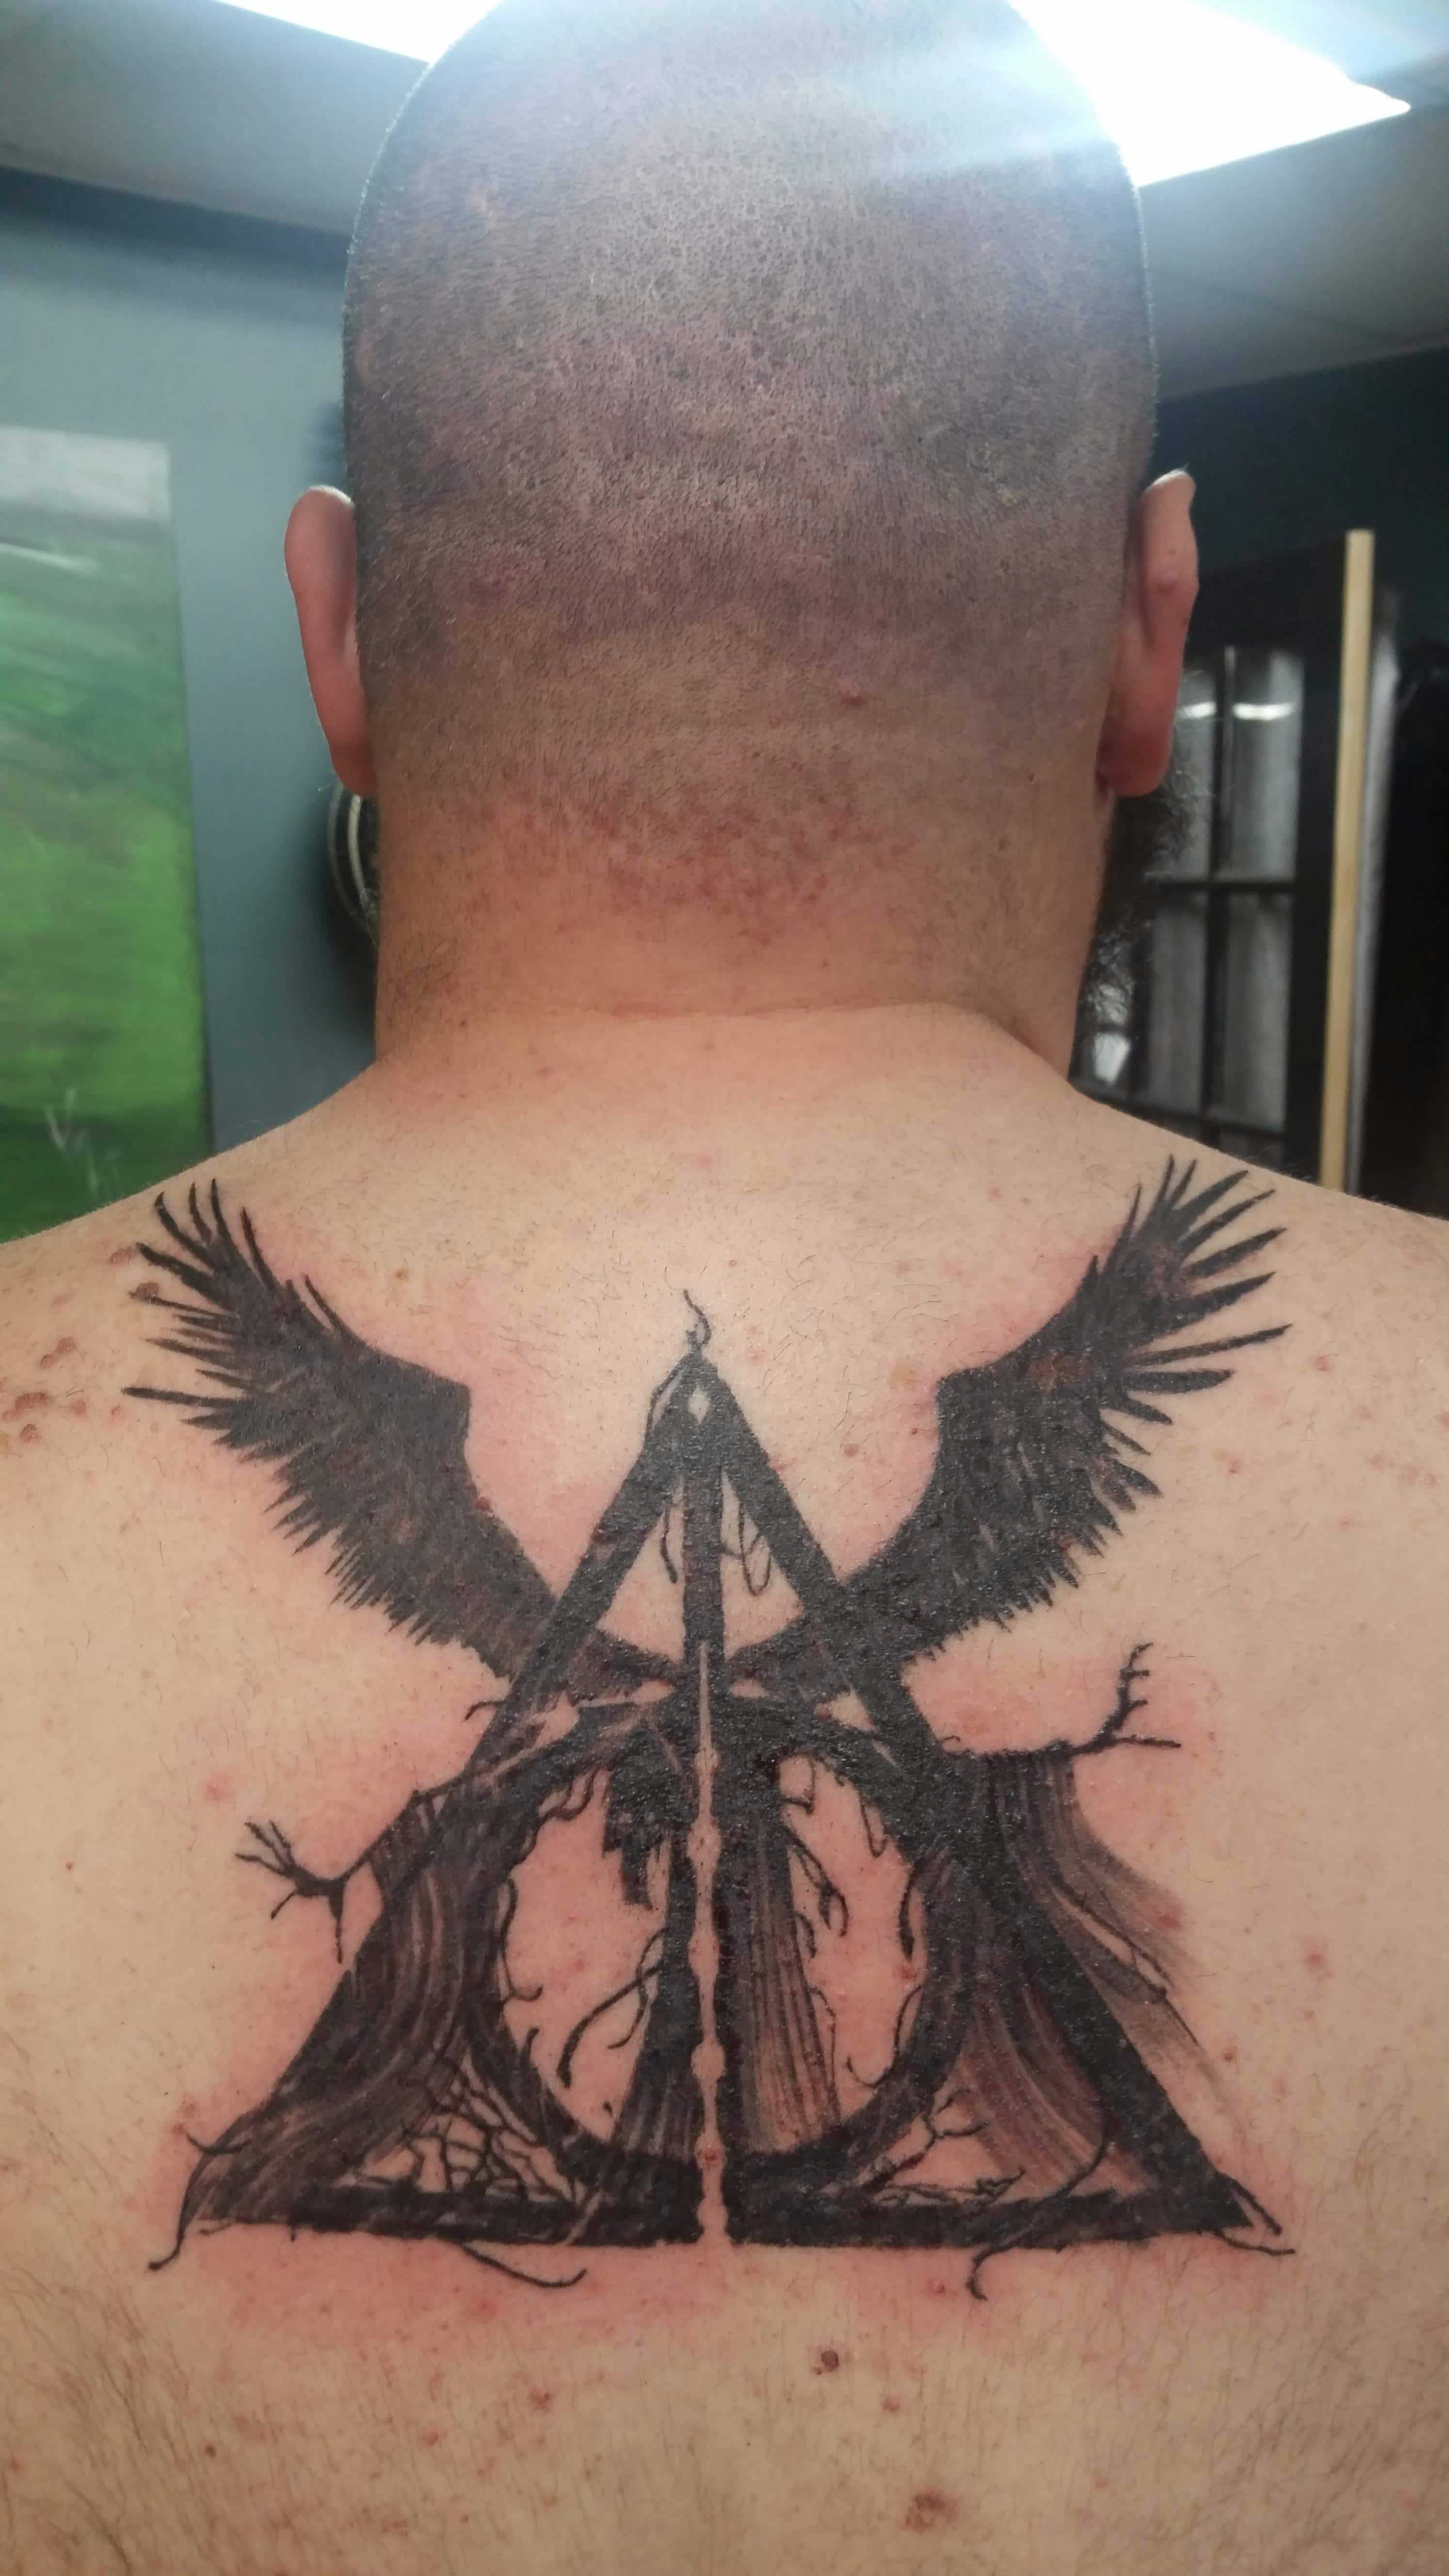 Deathly Hallows Tattoo explained – 100+ Deathly Hallows Tattoo Designs